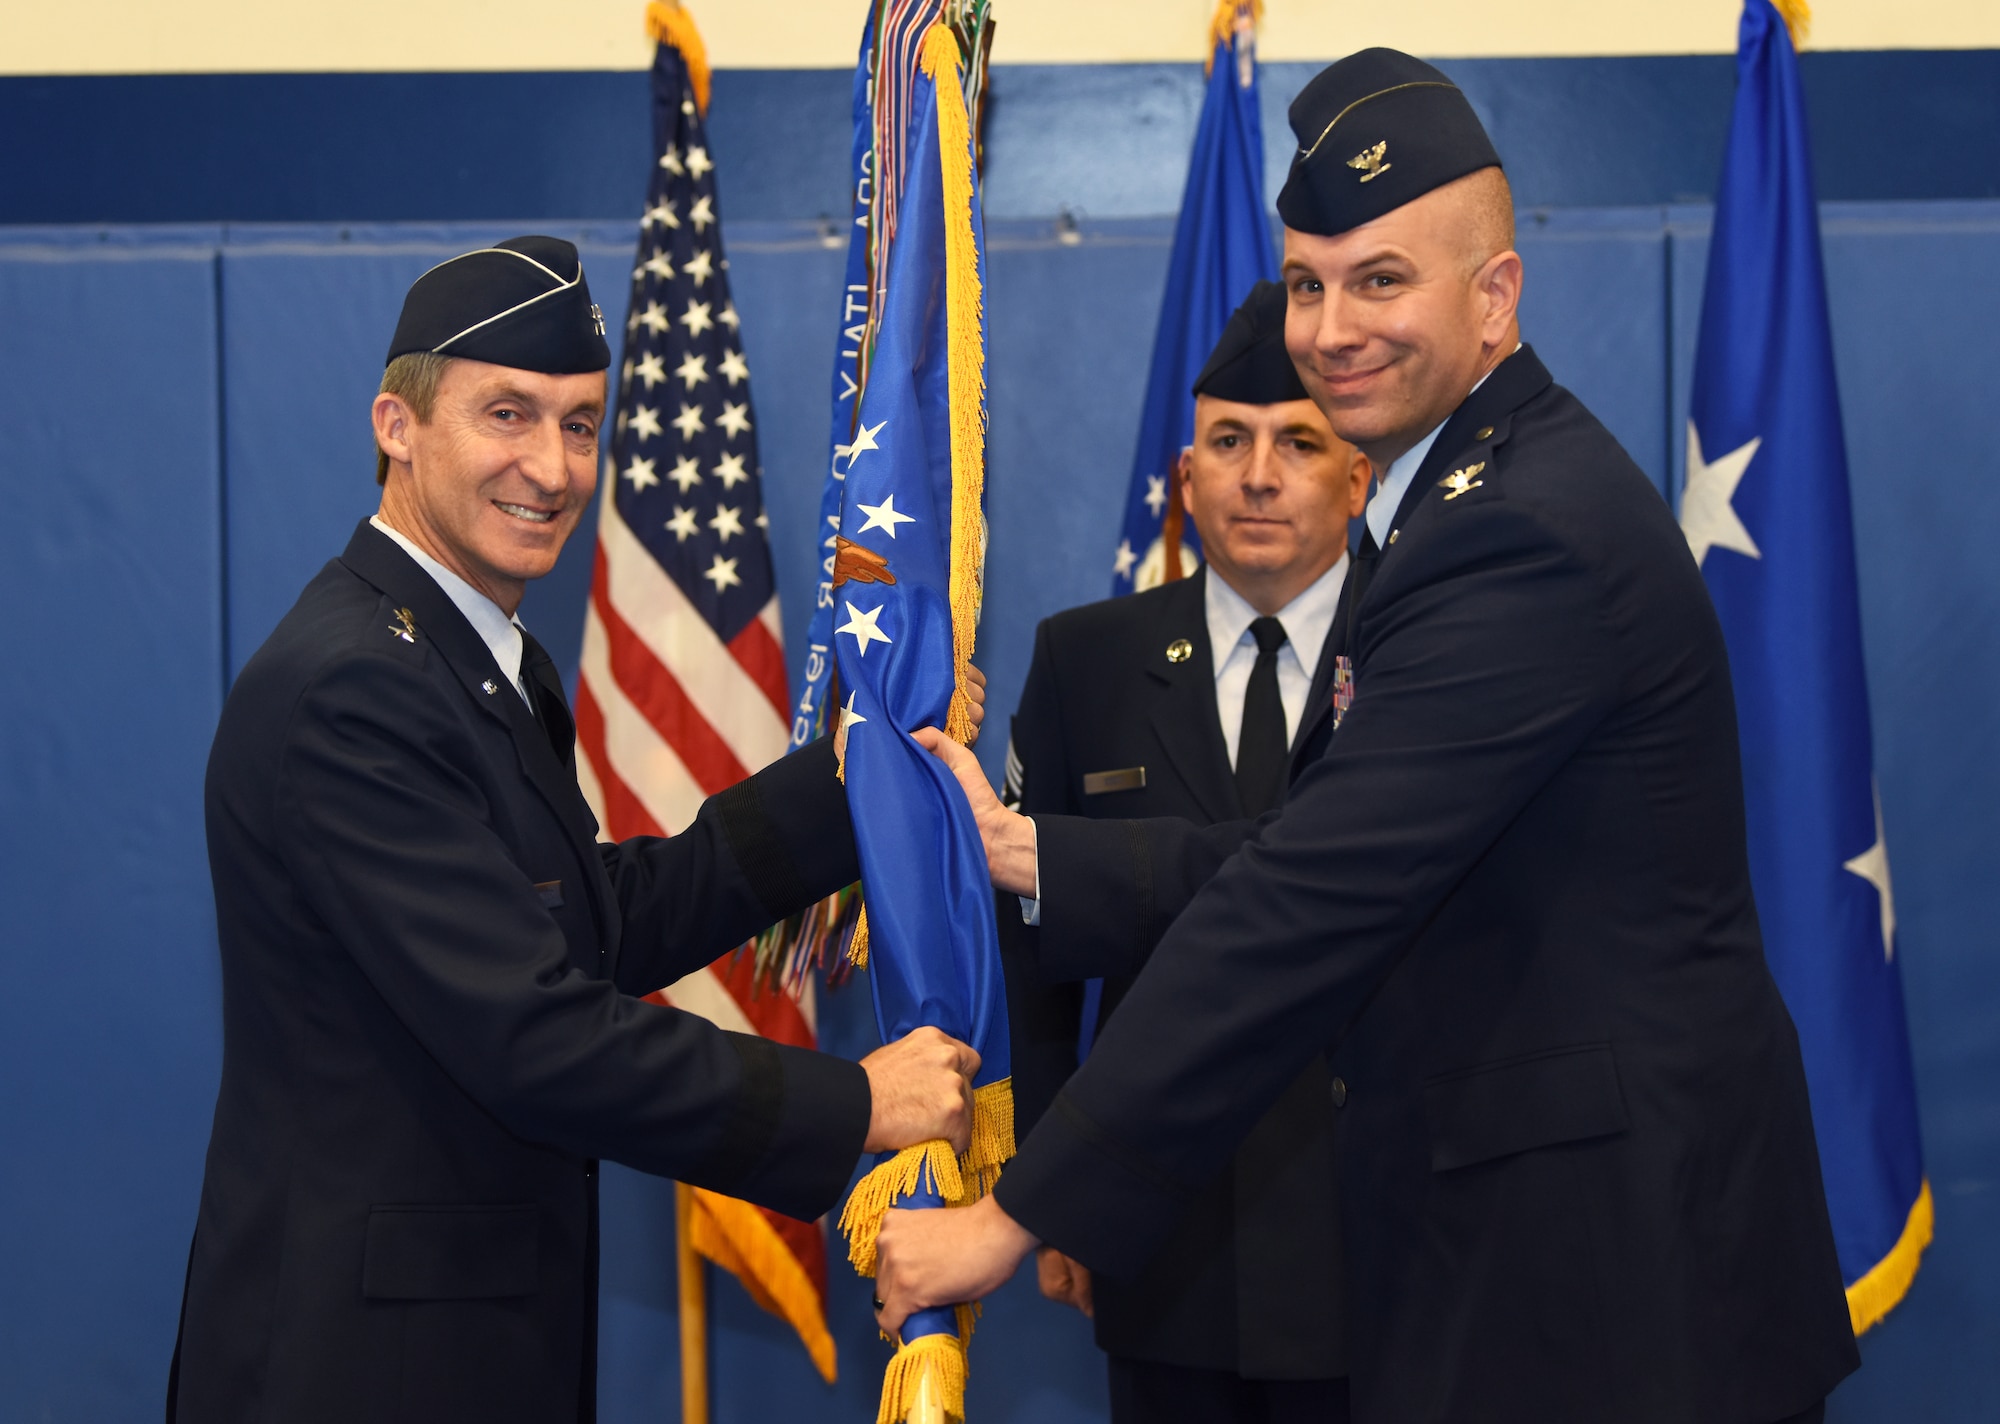 Maj. Gen. Ronald “Bruce” Miller, 10th Air Force commander, hands the 310th Space Wing guidon to Col. Dean D. Sniegowski, incoming 310th SW commander, during a change of command ceremony, Nov. 3rd, 2018.